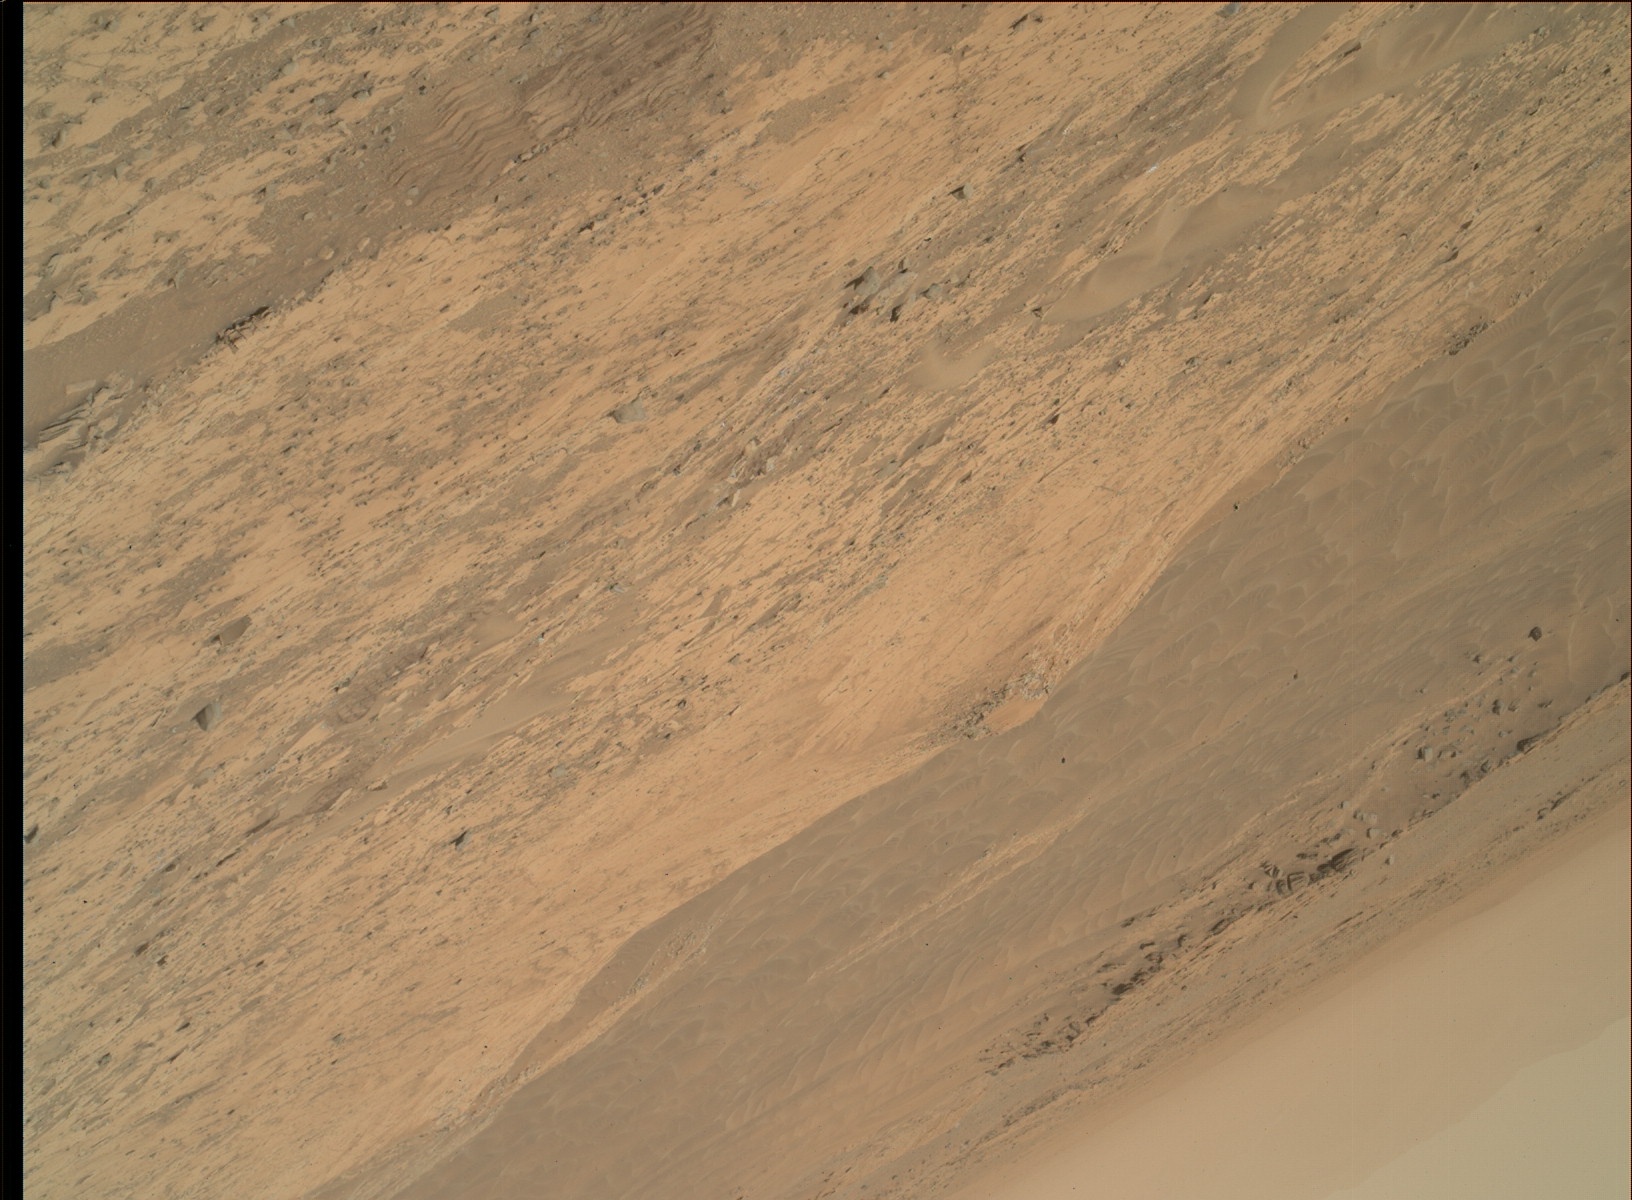 Nasa's Mars rover Curiosity acquired this image using its Mars Hand Lens Imager (MAHLI) on Sol 835